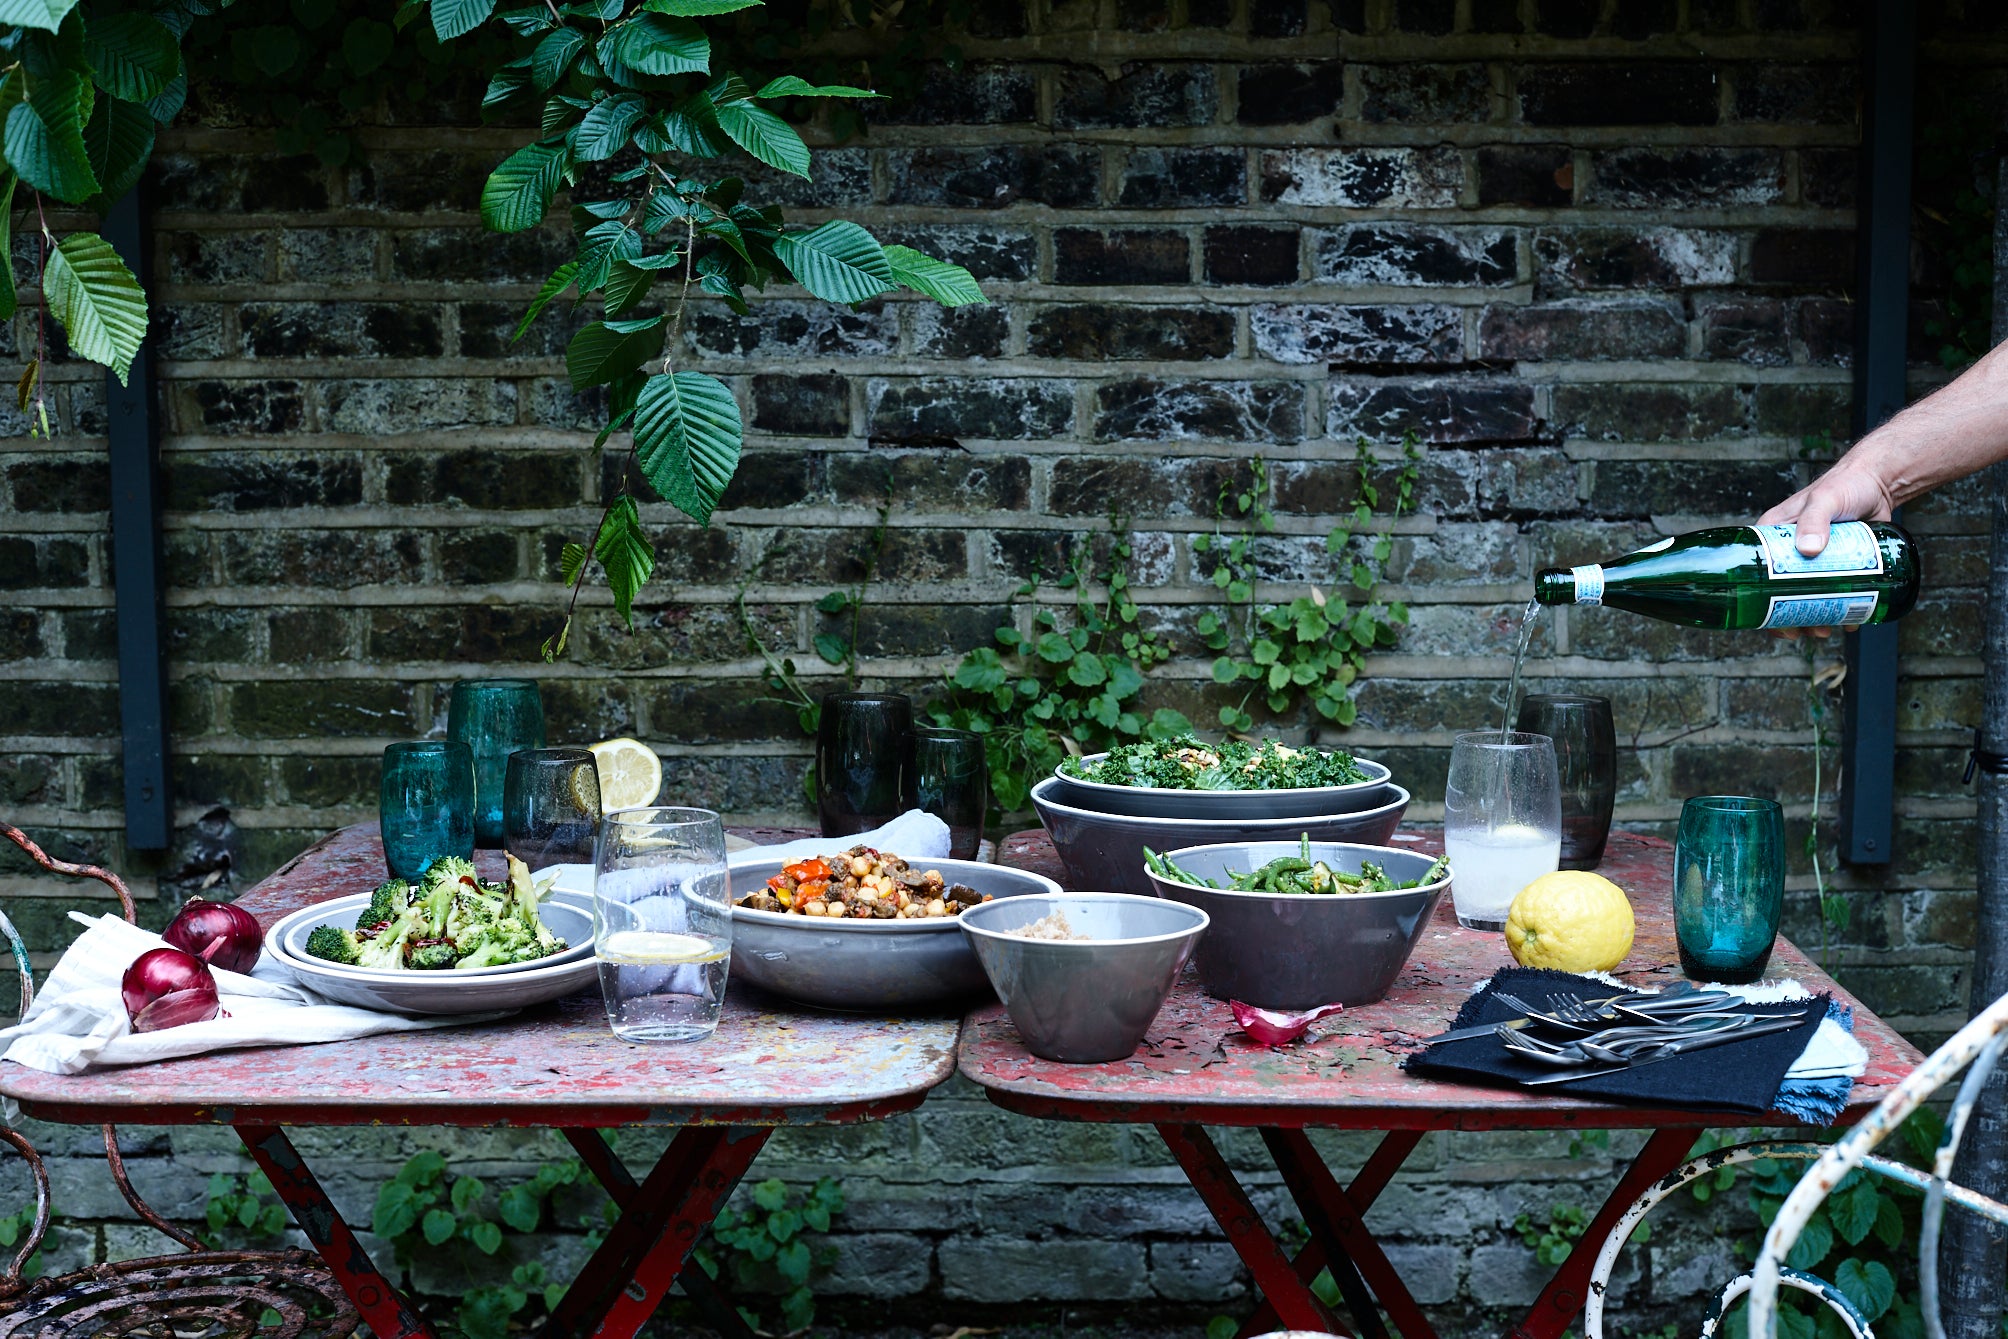 DINING ALFRESCO - OUR FAVOURITE THING!